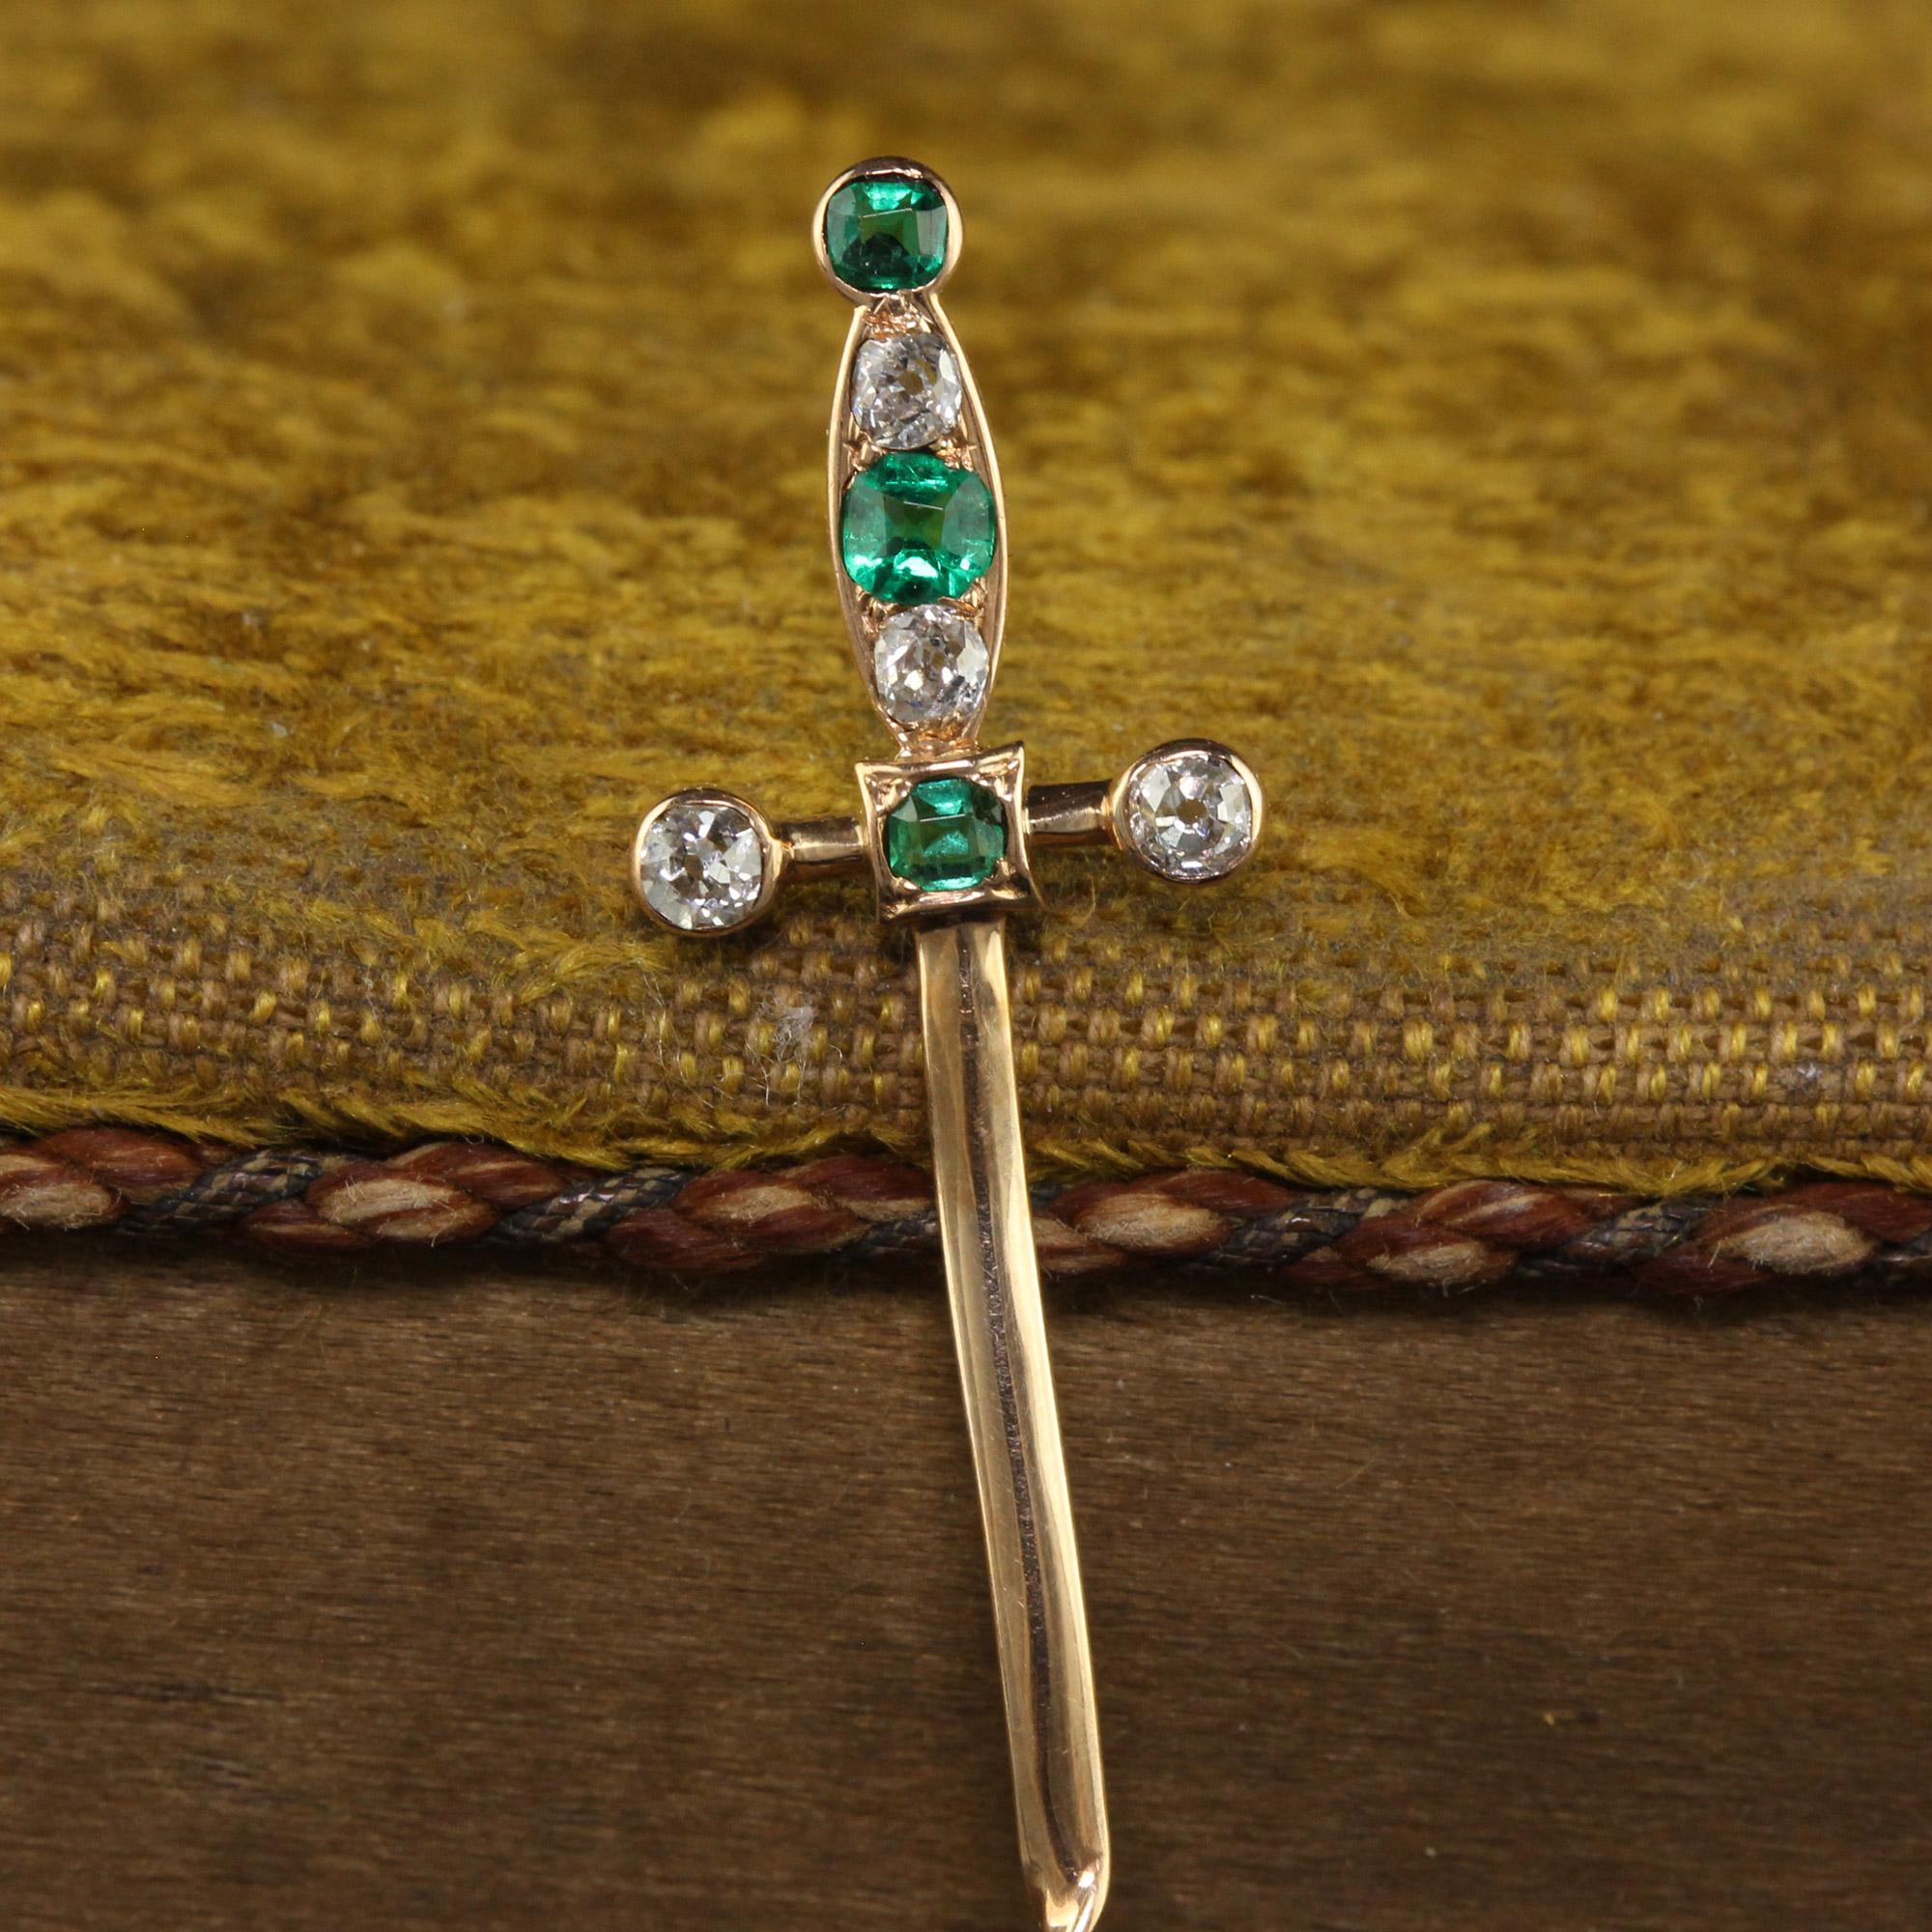 Beautiful Antique Victorian 18K Yellow Gold Old Cut Emerald and Diamond Sword Stick Pin. This gorgeous Victorian stick pin is crafted in 18k yellow gold. This incredible pic features a sword that has the handle and hilt adorned in natural emeralds